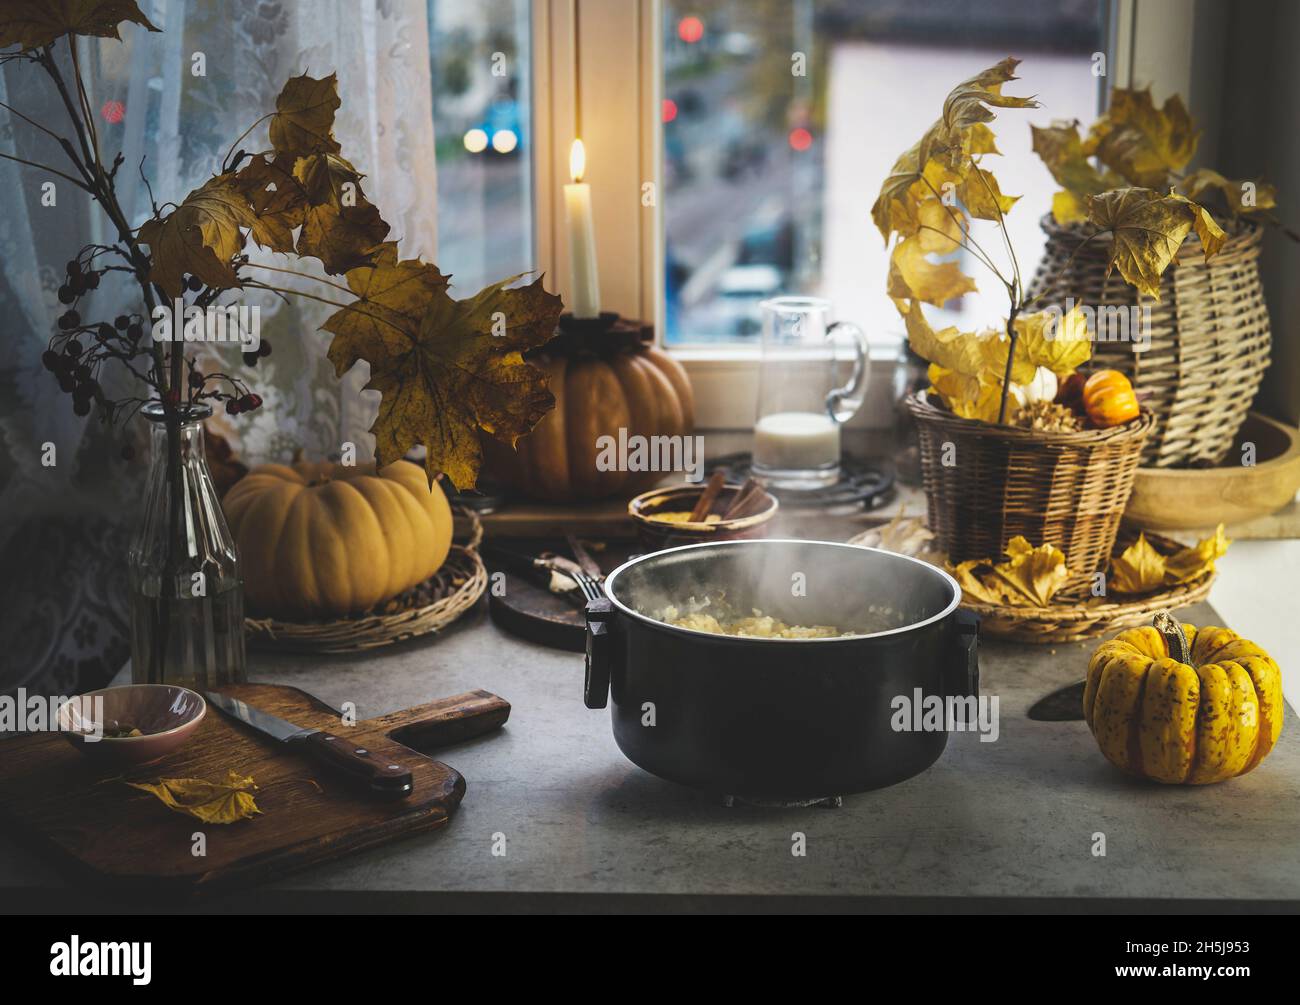 Cooking pot with steam and millet on kitchen table with pumpkins, autumn leaves, candles and kitchen utensils at window background. Cooking healthy gr Stock Photo